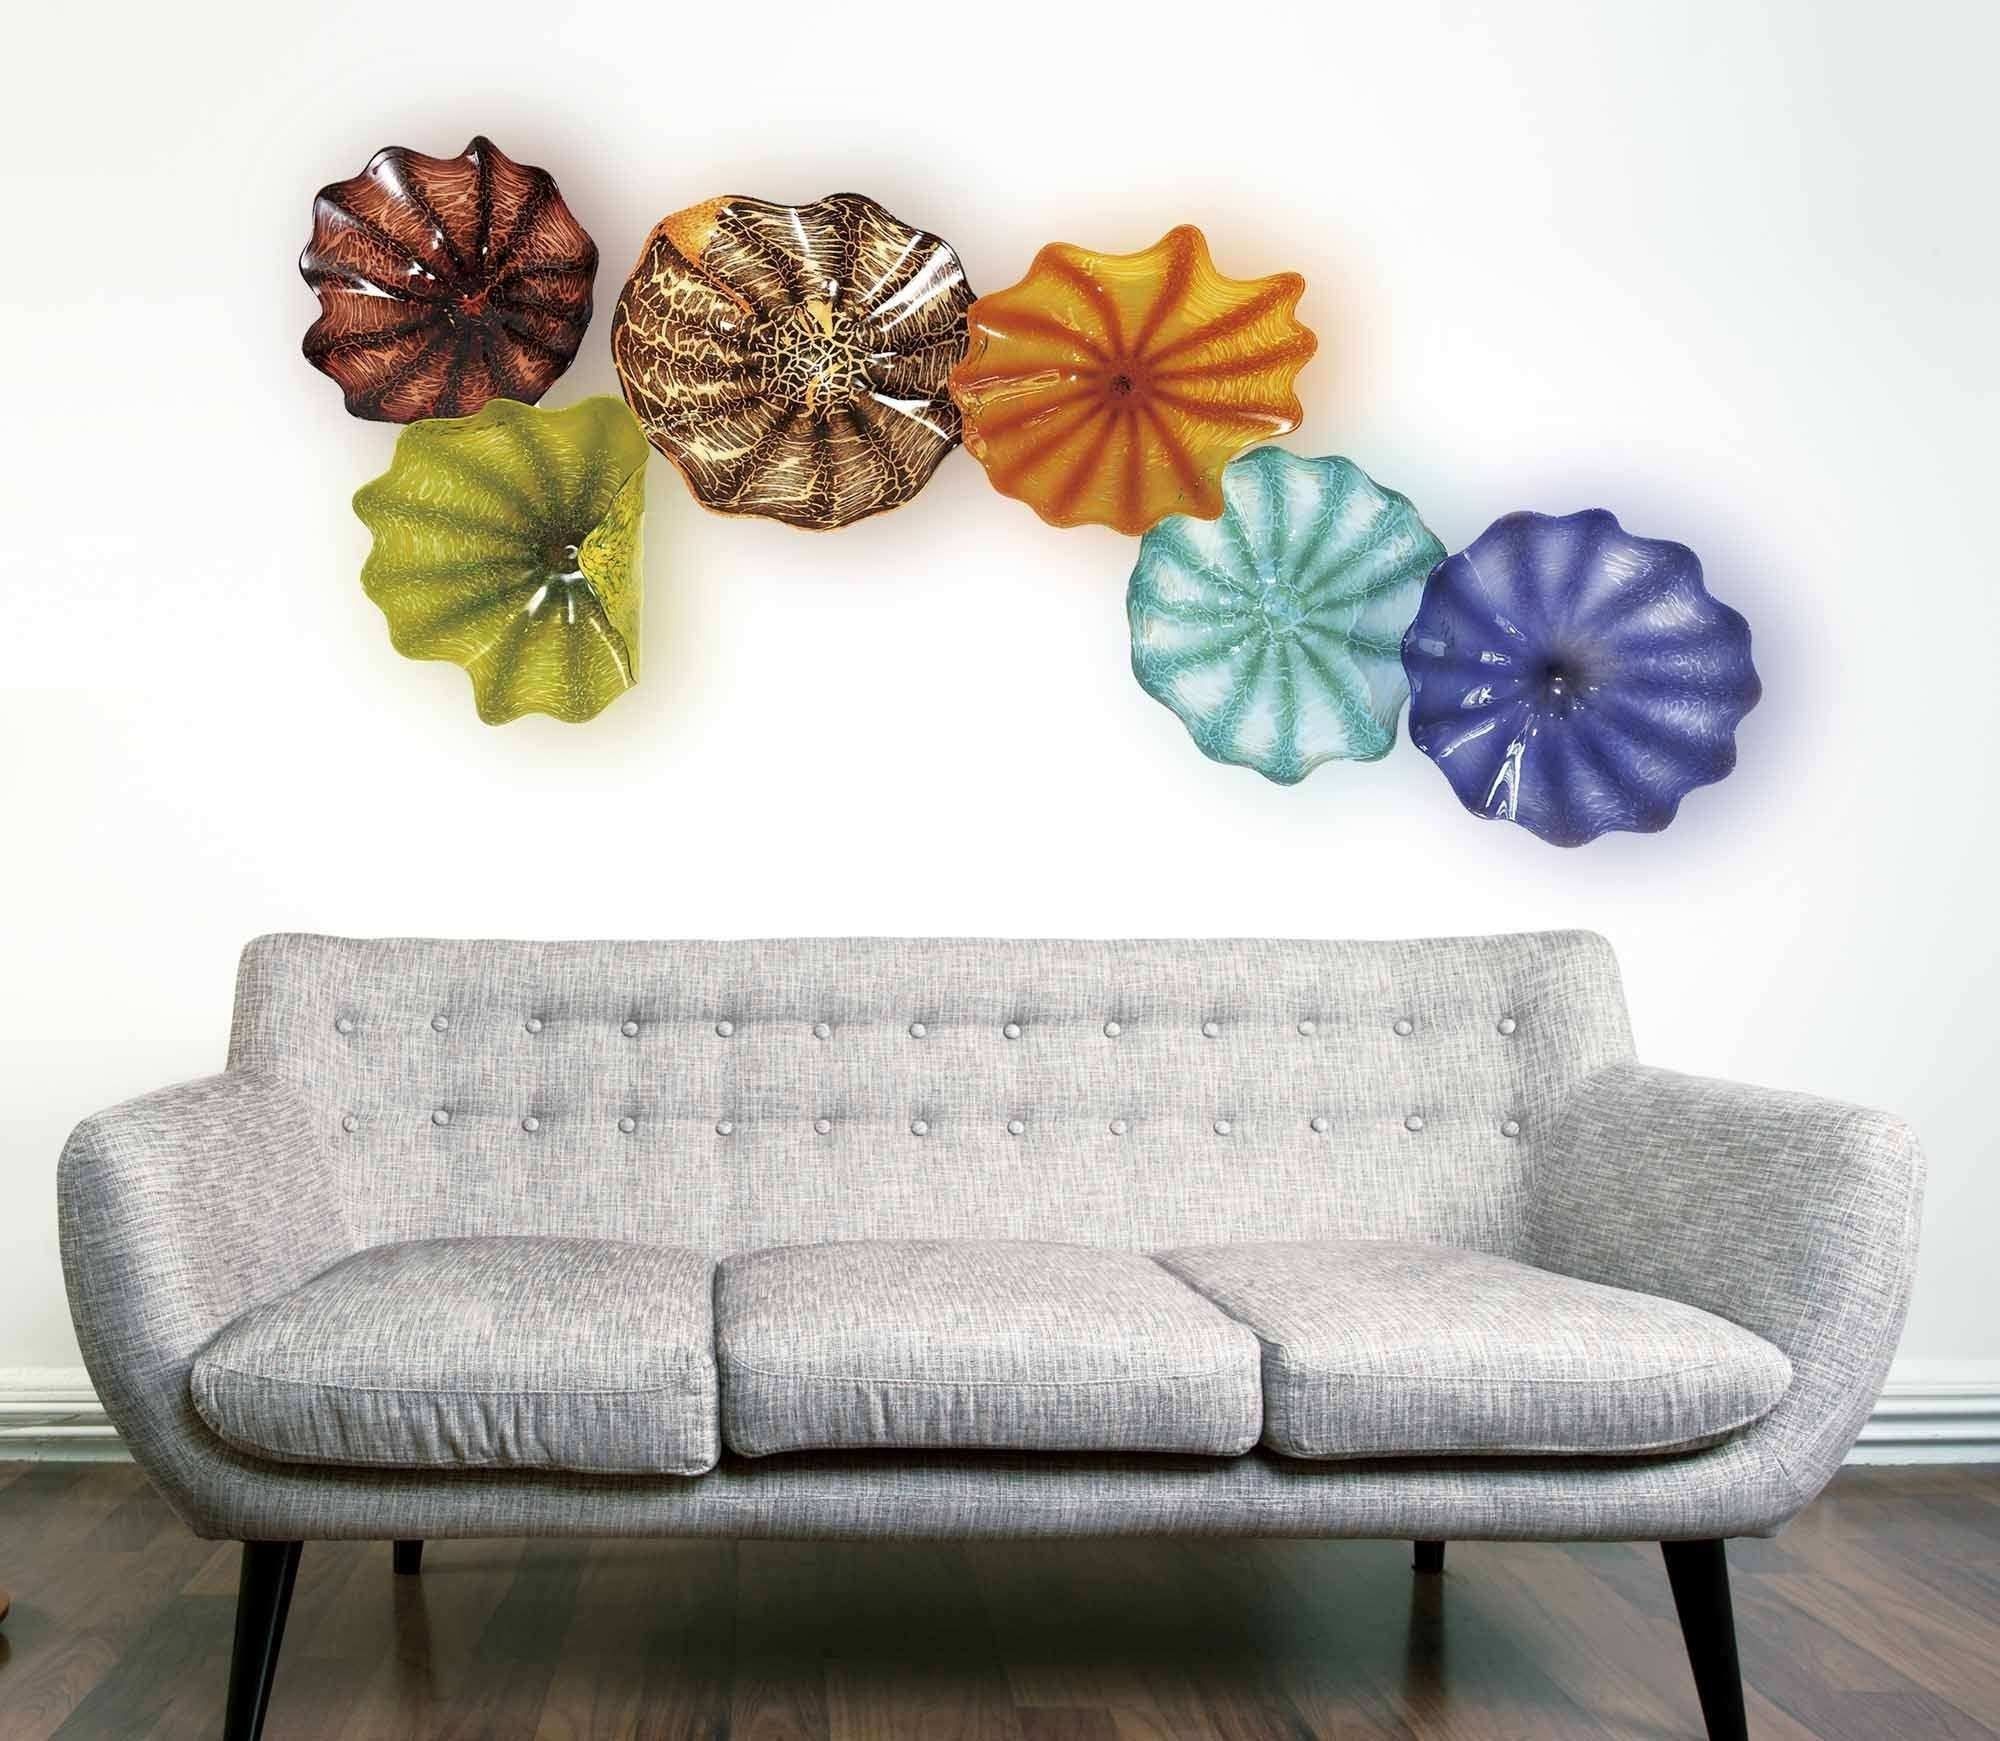 Glass Plate Wall Art Awesome Viz Glass Inc Art And Accessories With Regard To Glass Plate Wall Art (View 7 of 20)